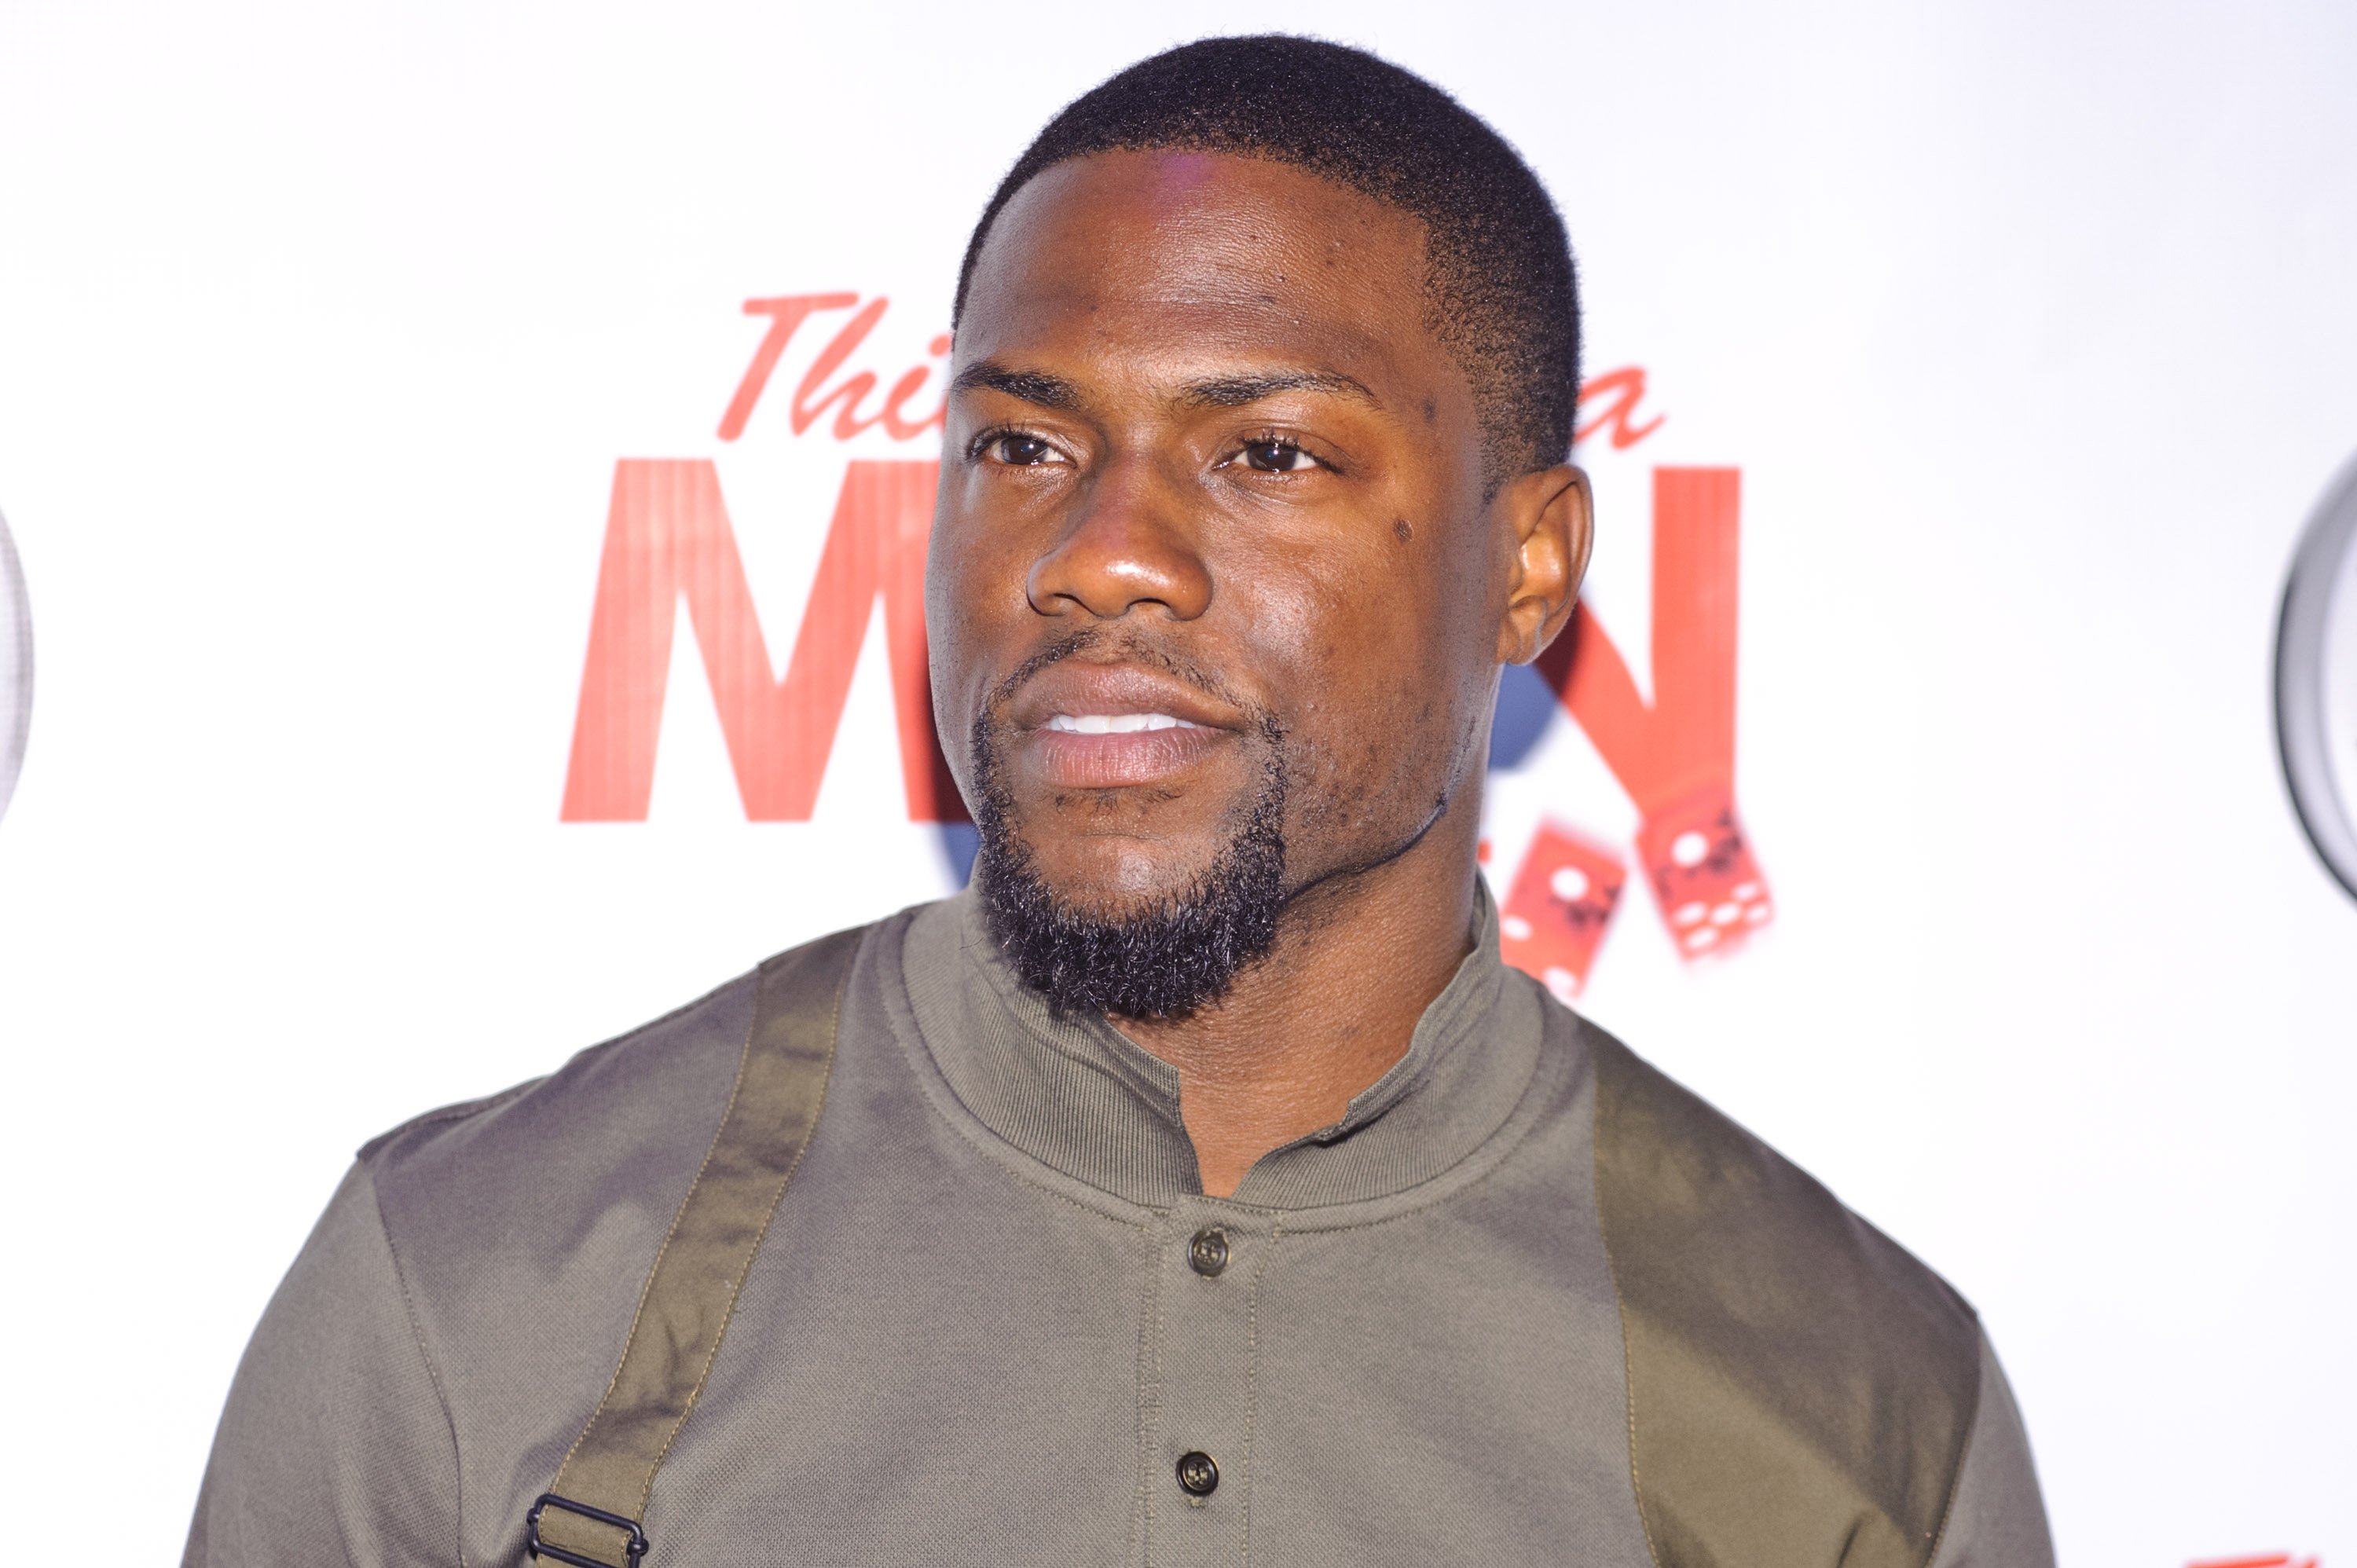 Kevin Hart at a screening of 'Think Like A Man Too' on June 12, 2014 in Chicago, Illinois | Photo: Getty Images